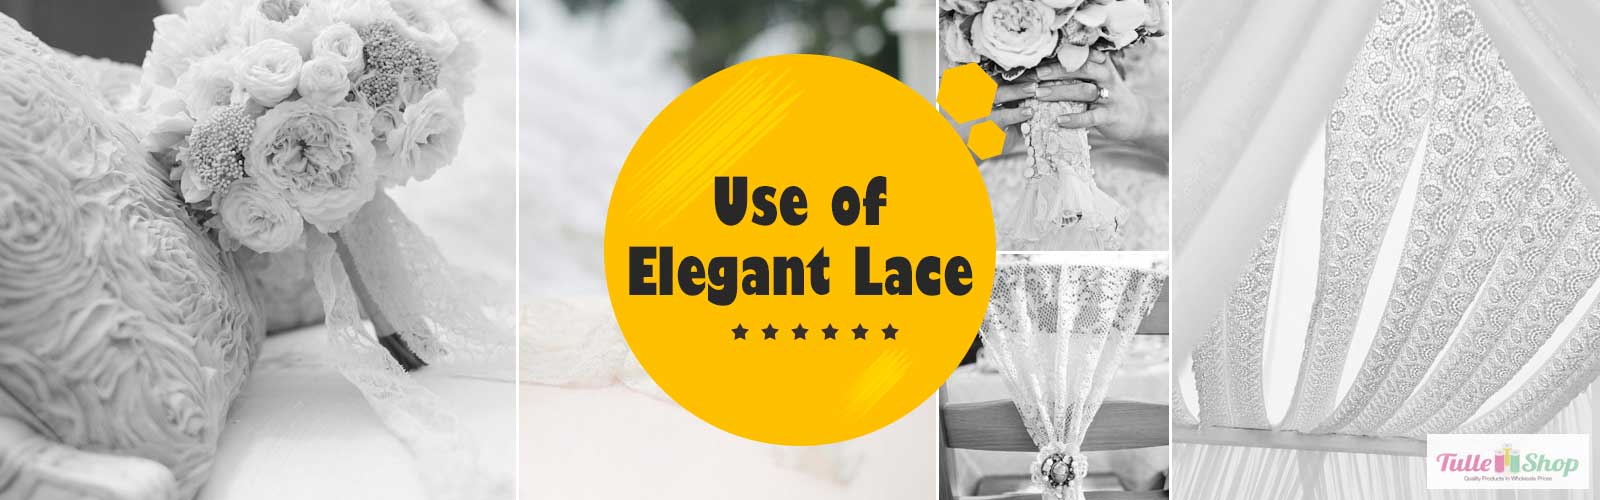 6 Amazing Ways to Use Lace for a Vintage Wedding Theme